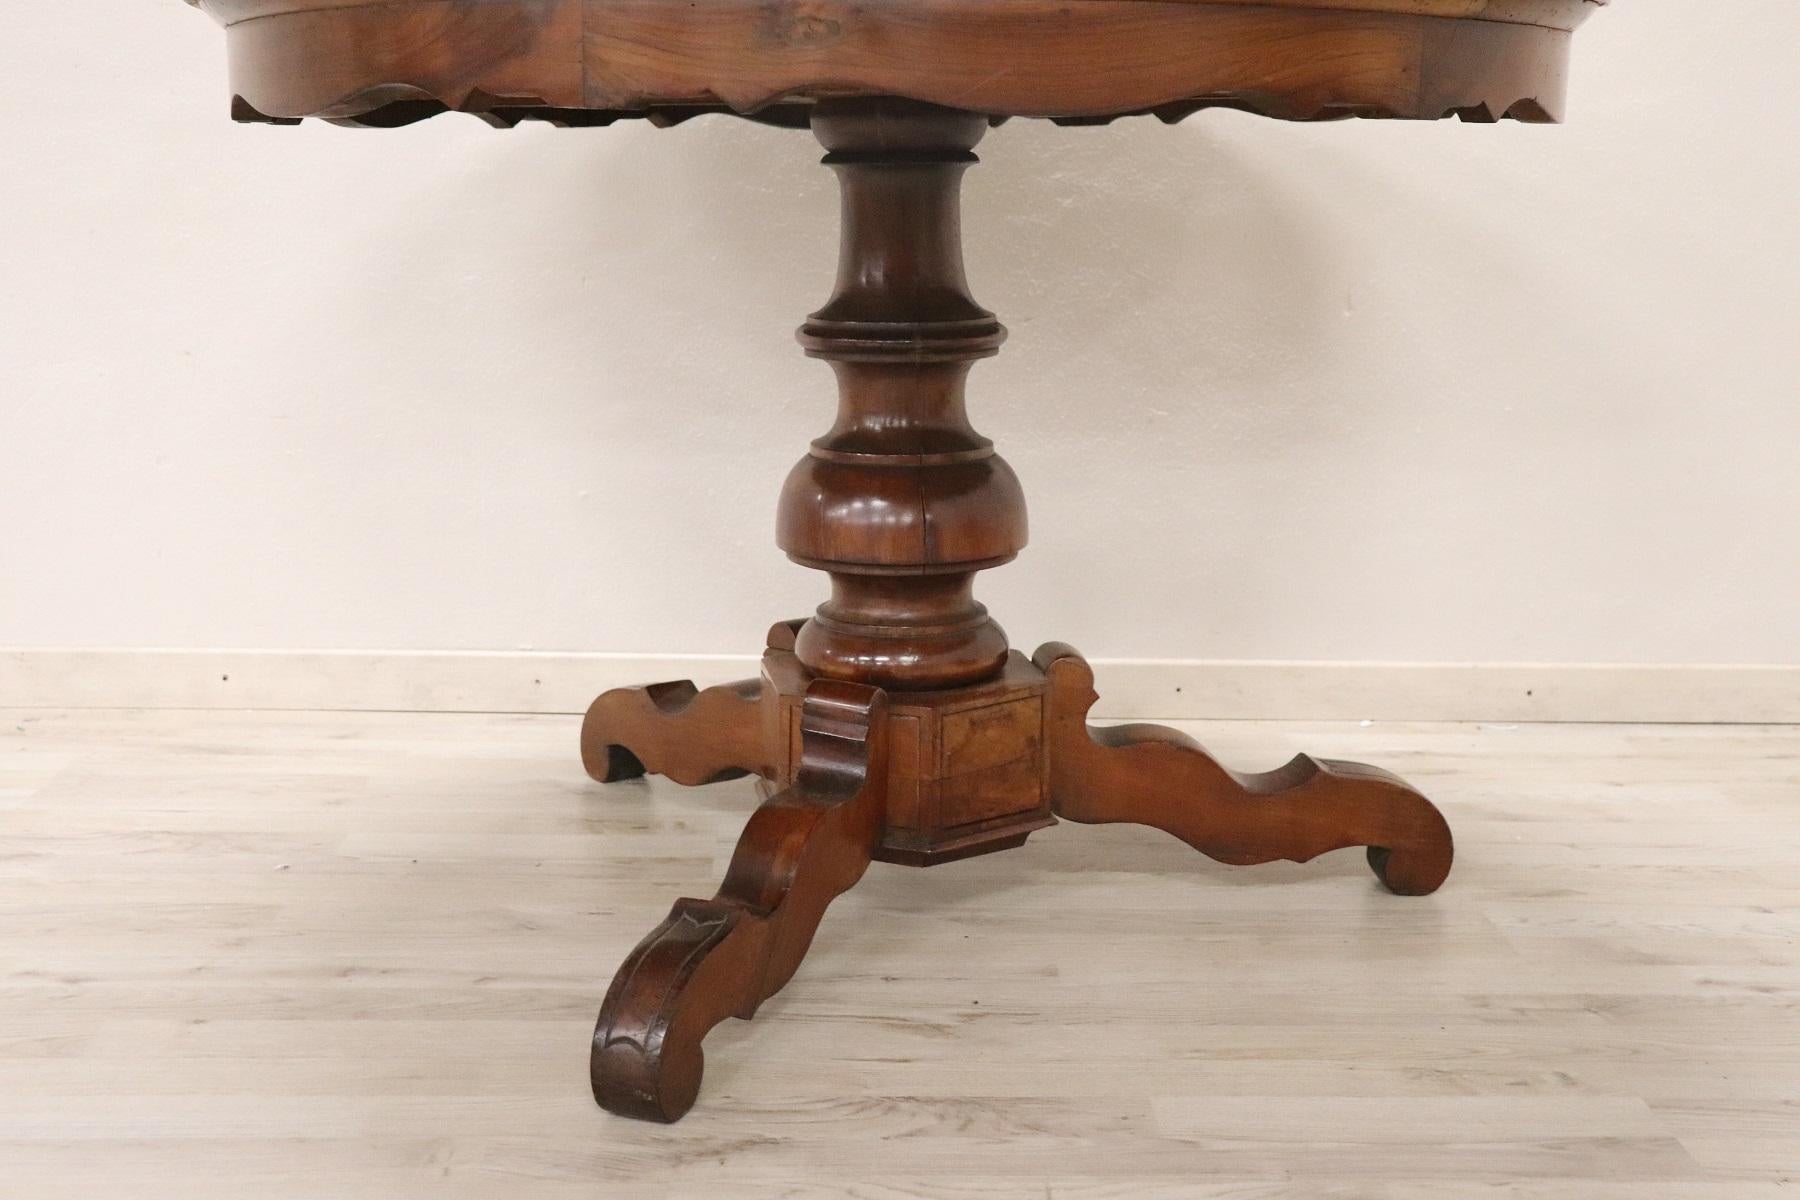 Beautiful important antique round center table 1845 in walnut inlay. Table with elegant solid turned central leg. The table band presents elegant decoration move. The tabletop has an elegant inlay decoration with a central star made of fine woods.